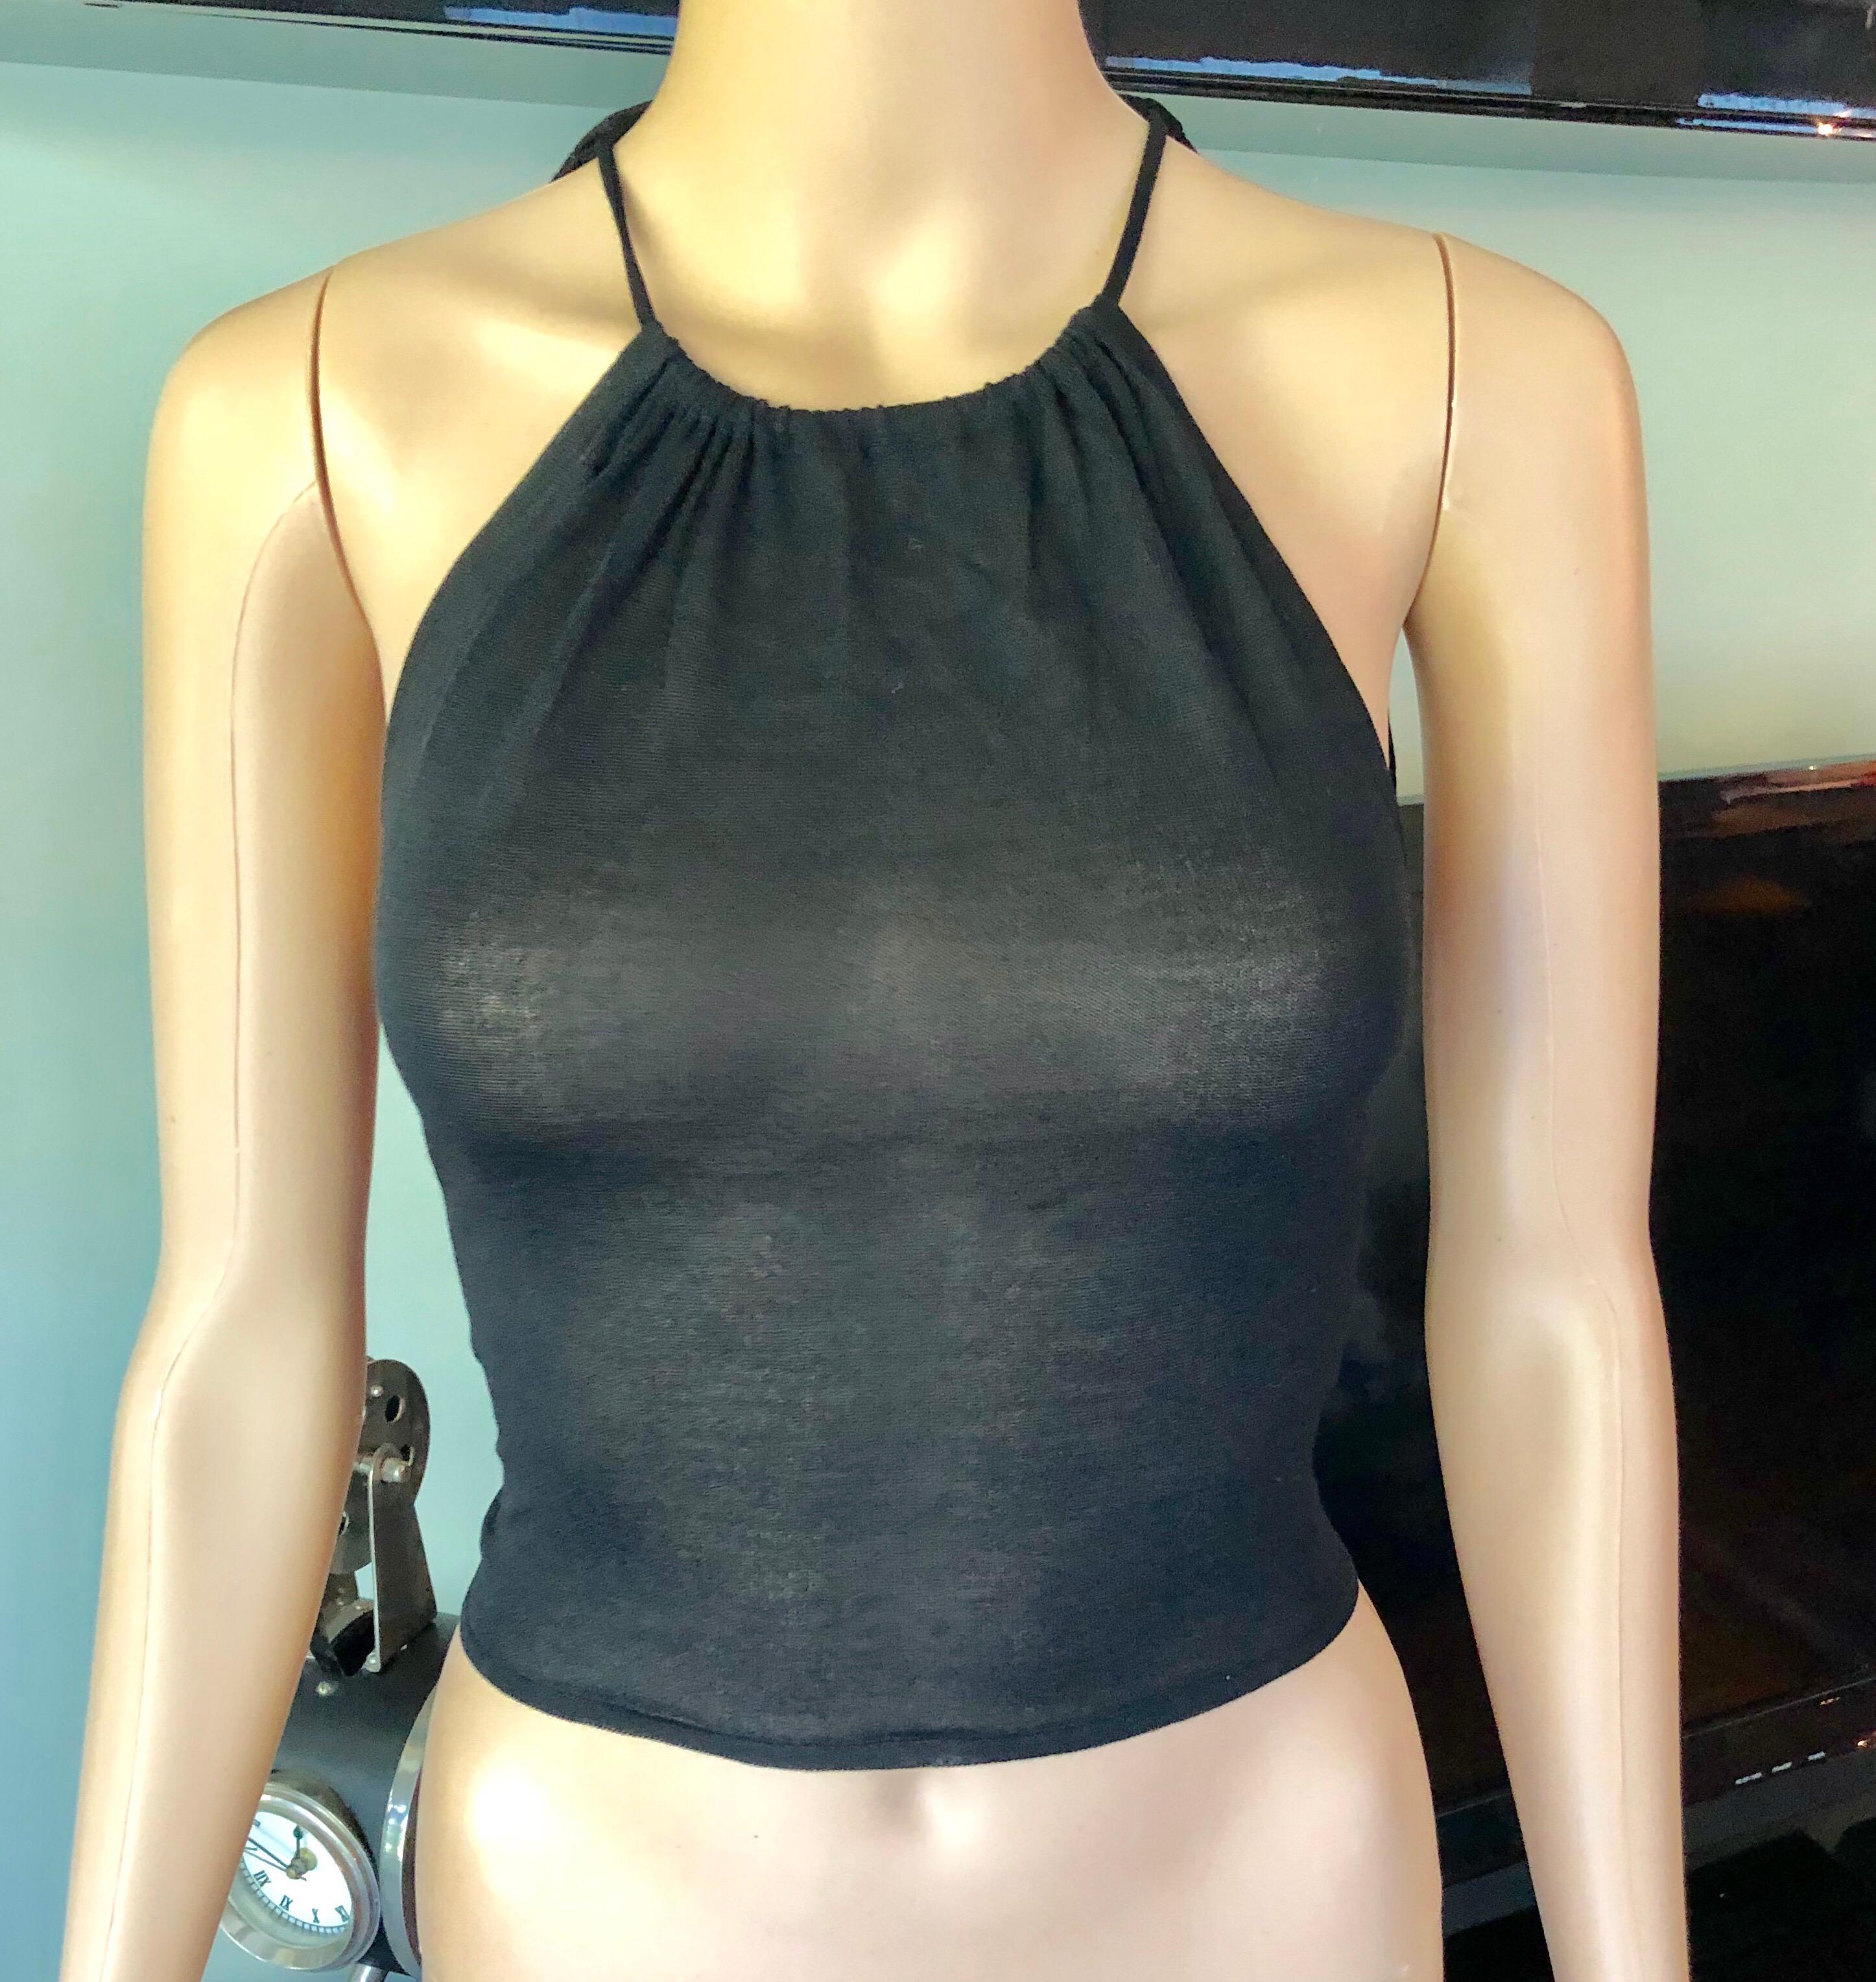 Gucci by Tom Ford c.2001 Silk Knit Halter Backless Black Crop Top

Gucci silk knit crop top with high neck, sash tie at back and silver-toned metal logo buckle at nape.
